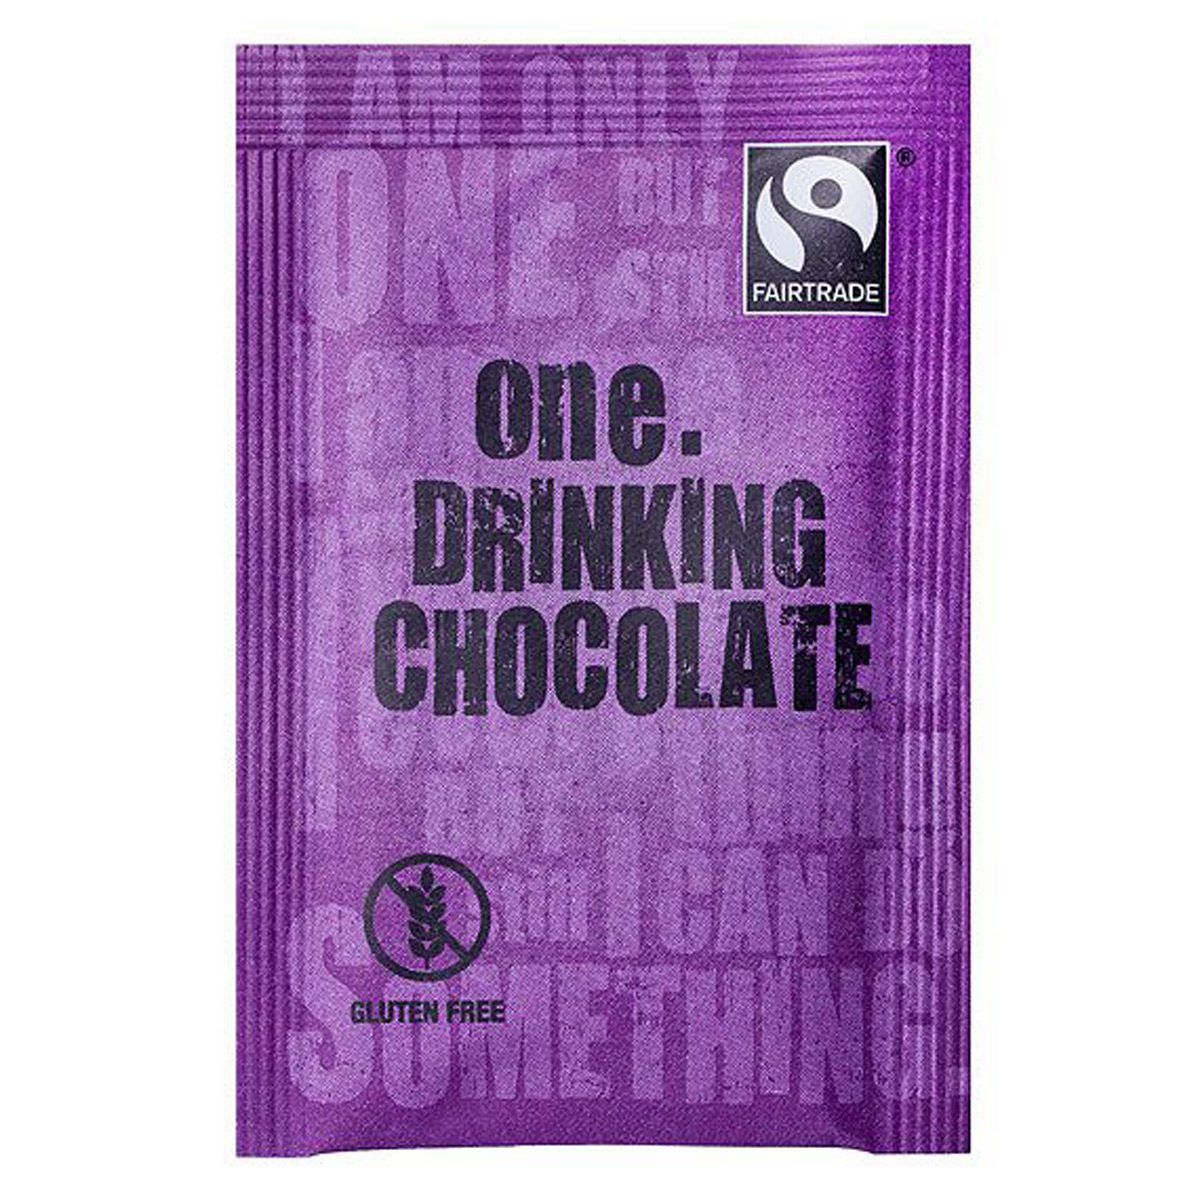 consumables-hospitality-beverage-food-one-fairtrade-drinking-chocolate-x300-great-tasting-gluten-free-drinking-chocolate-fairtrade-saving-the-world-vjs-distributors-ONEDC